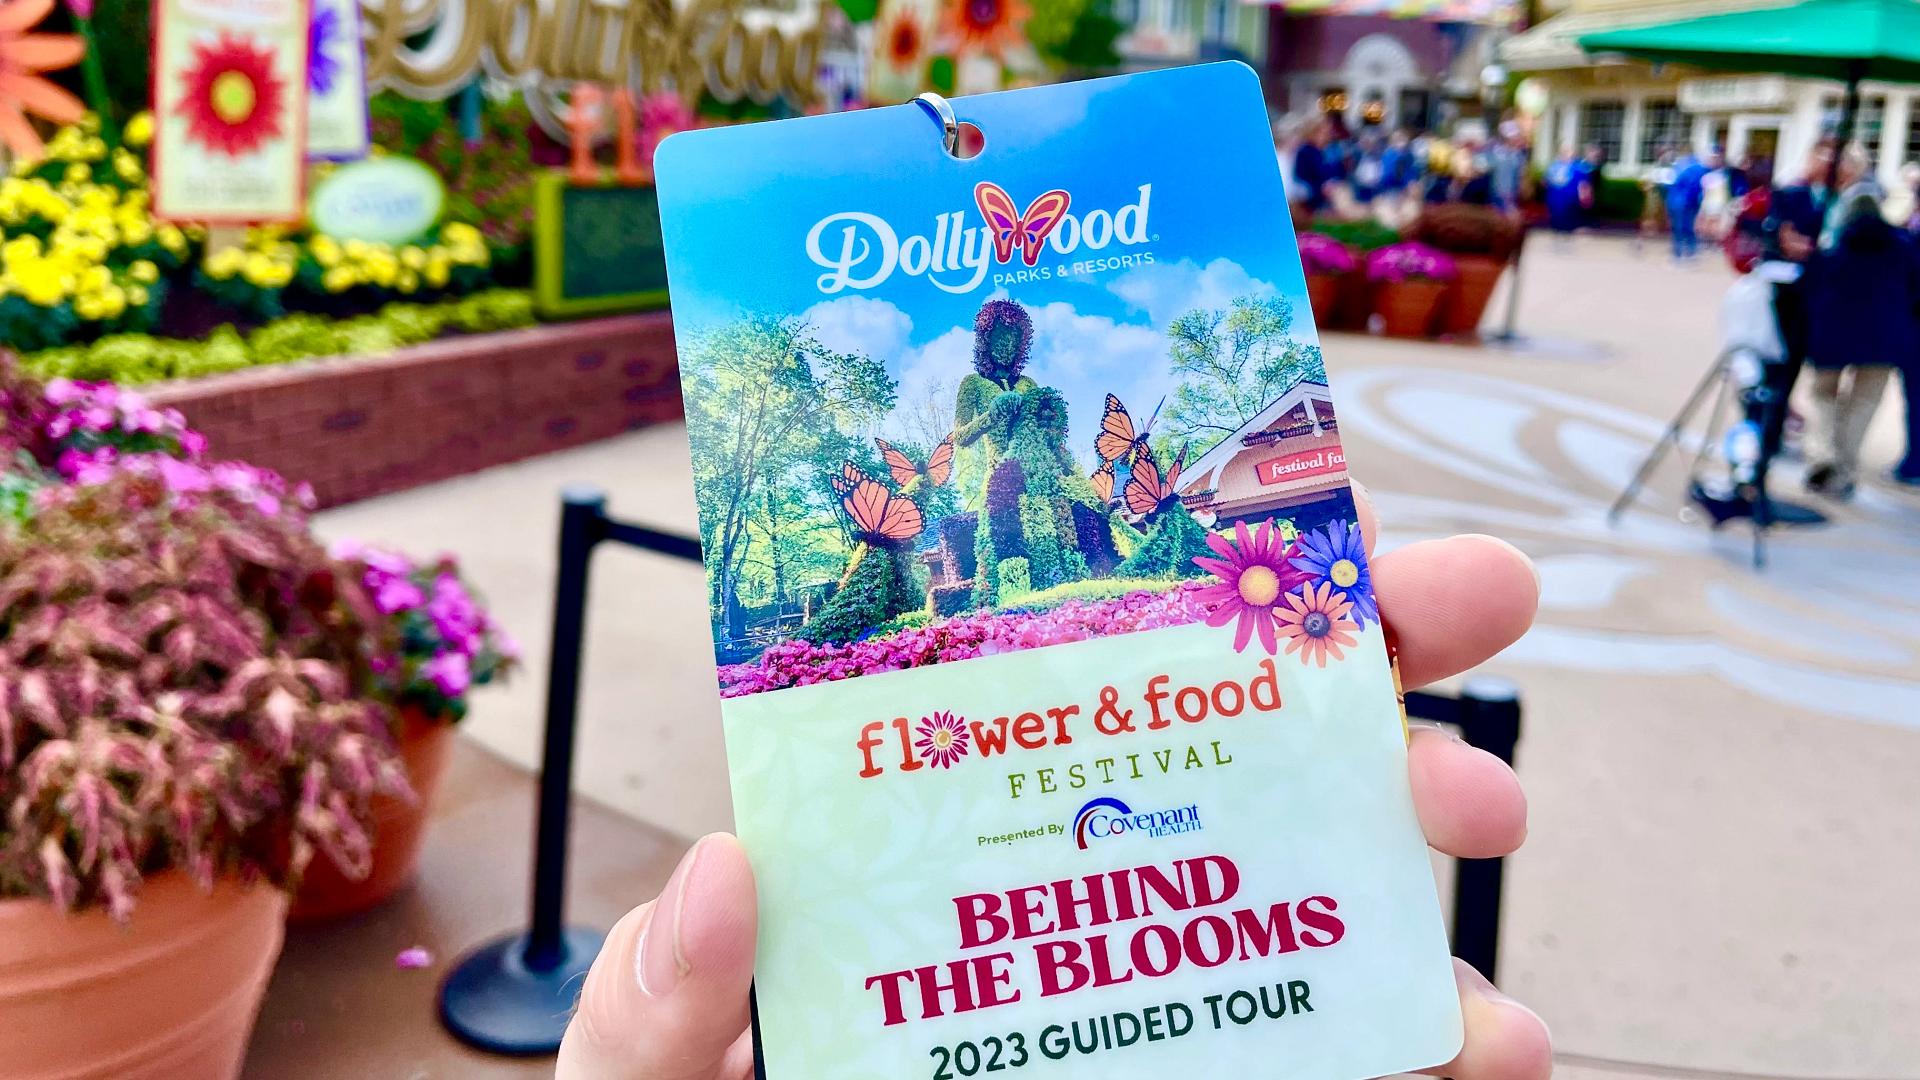 Behind the Blooms: A Guided Tour at Dollywood’s Spring Festival